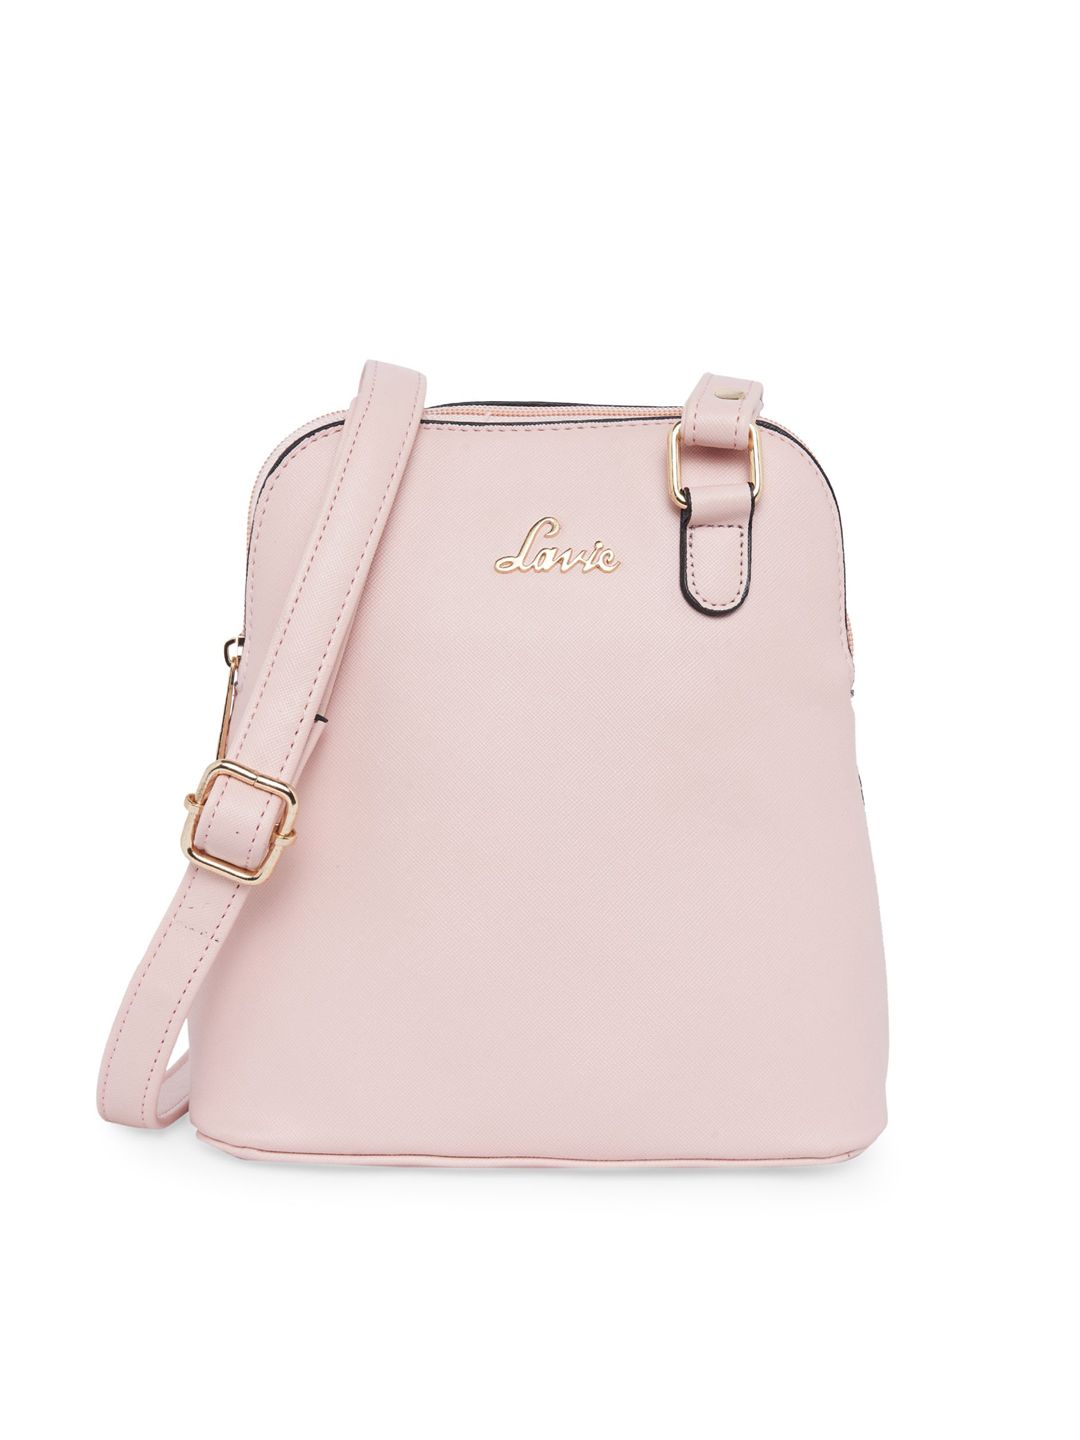 Lavie Pink Solid Structured Sling Bag Price in India